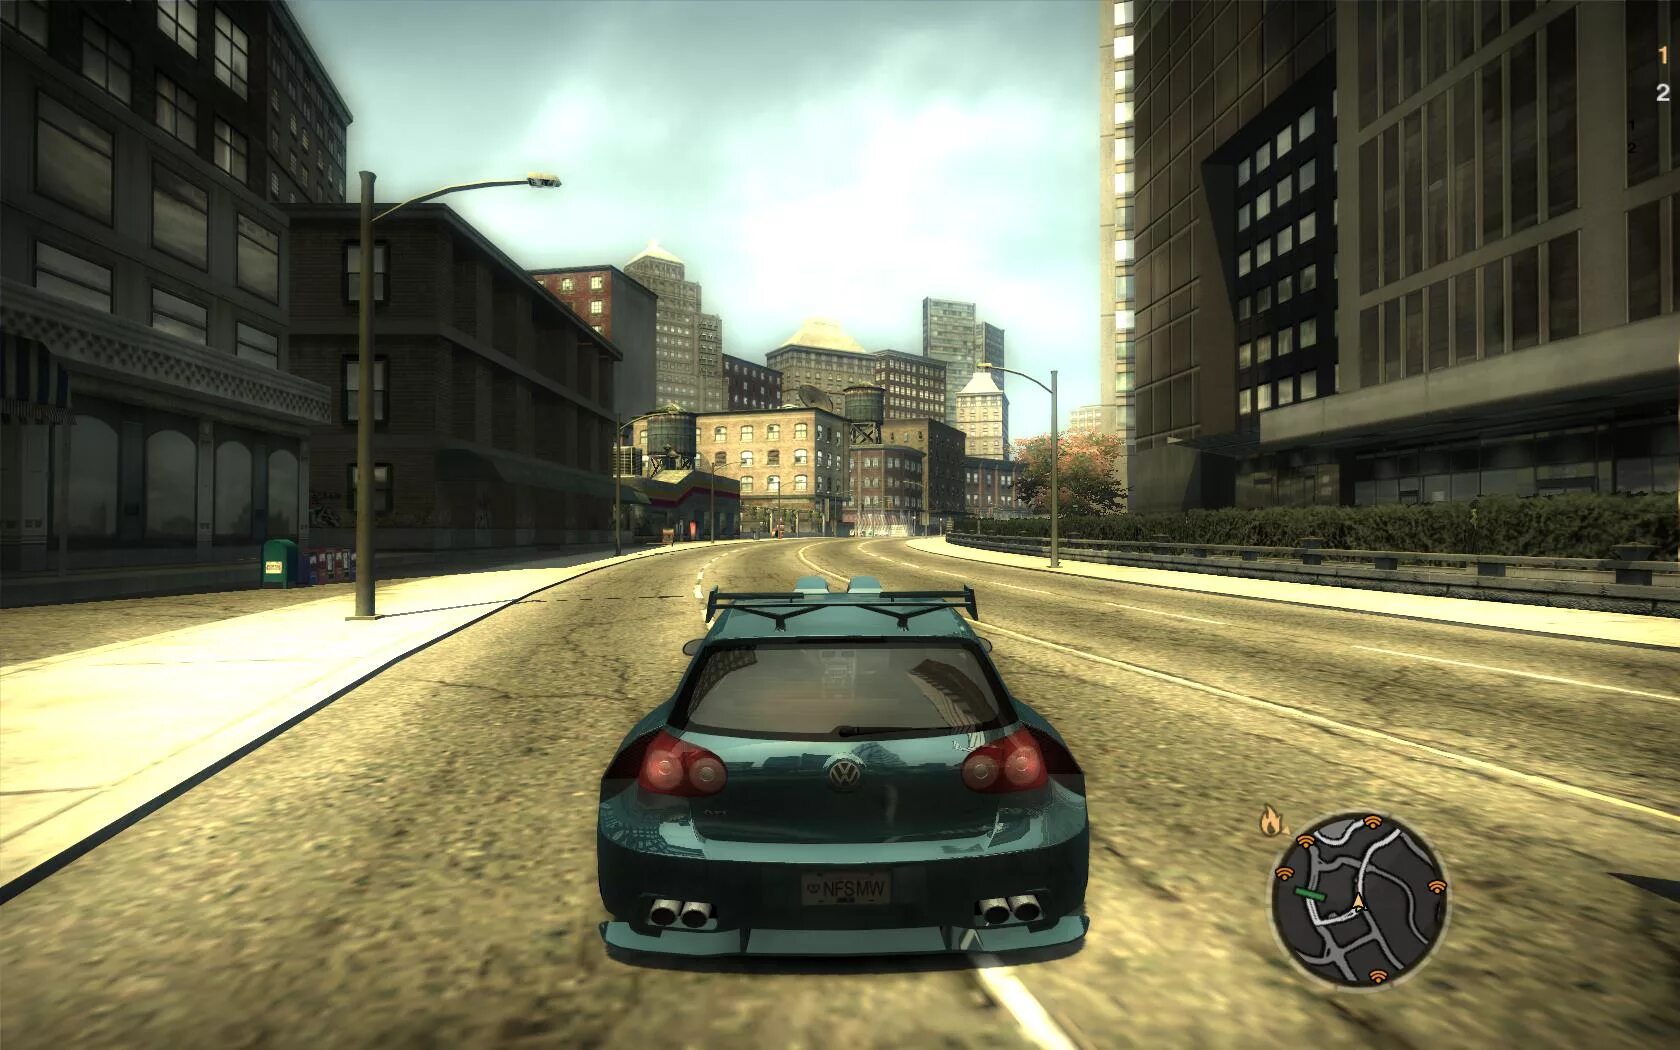 NFS most wanted 2005 геймплей. Most Water 2005. Гонки NFS most wanted 2005. NFS most wanted 2005 мост. Games need speed most wanted